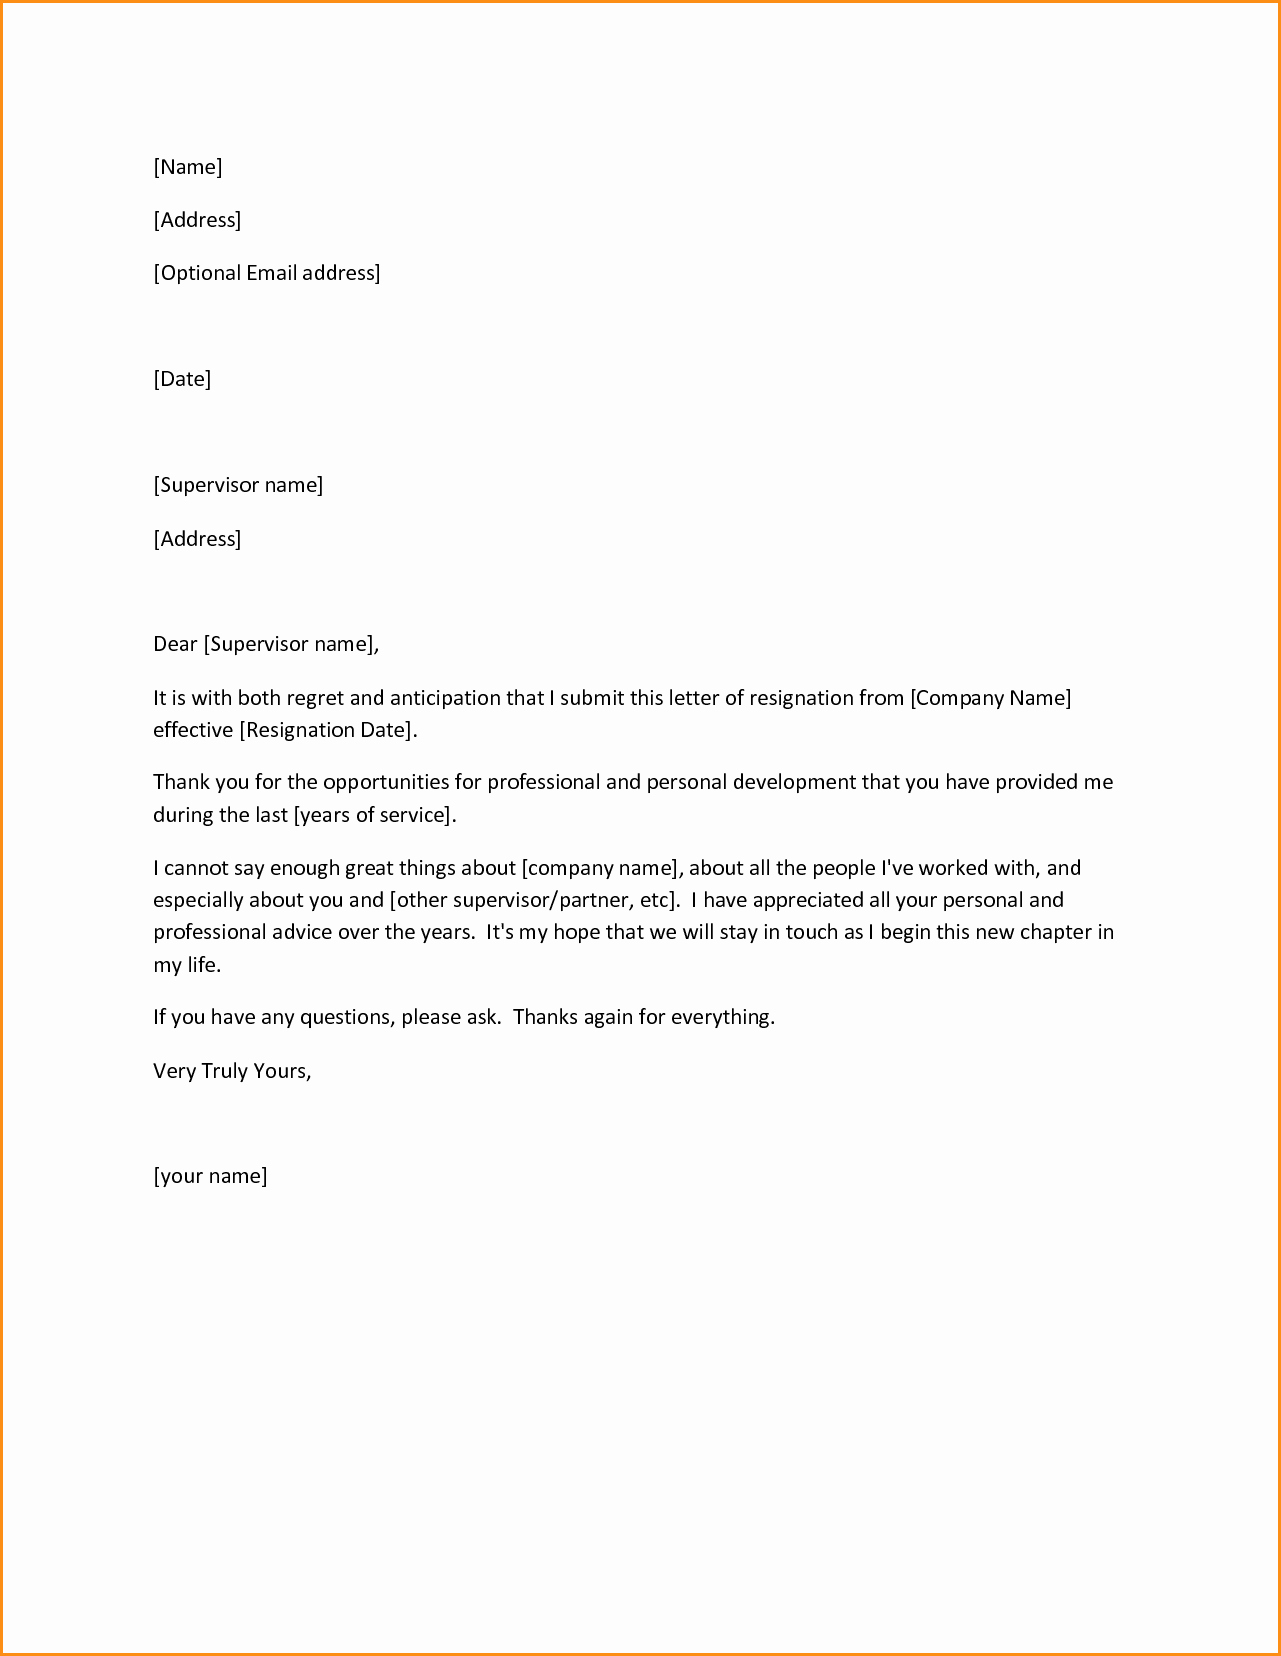 Template for Letter Of Resignation Awesome 10 Good Letters Of Resignation